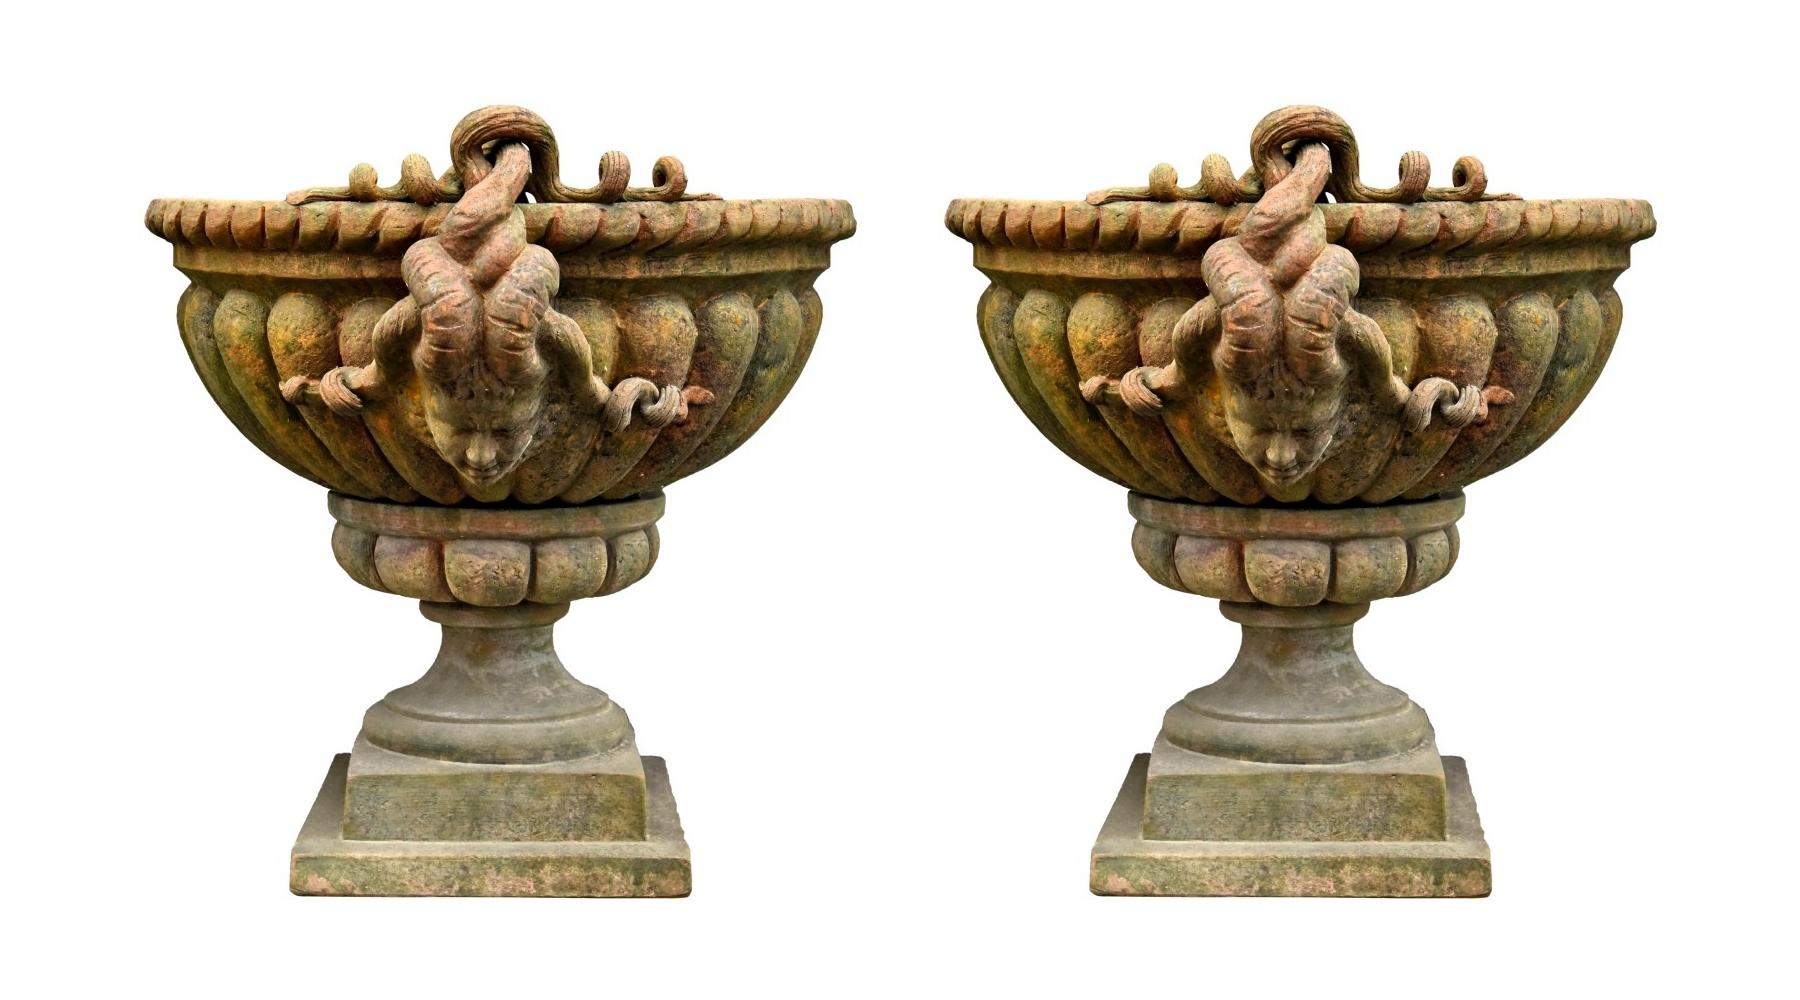 Pair of Baccellato vases with medusa heads terracotta goblet
19th century
Beautiful pod-shaped vase with two beautiful heads of Medusa, finished at the edge with a spiral, copy of a Florentine vase from the 16th century.
Measures: height